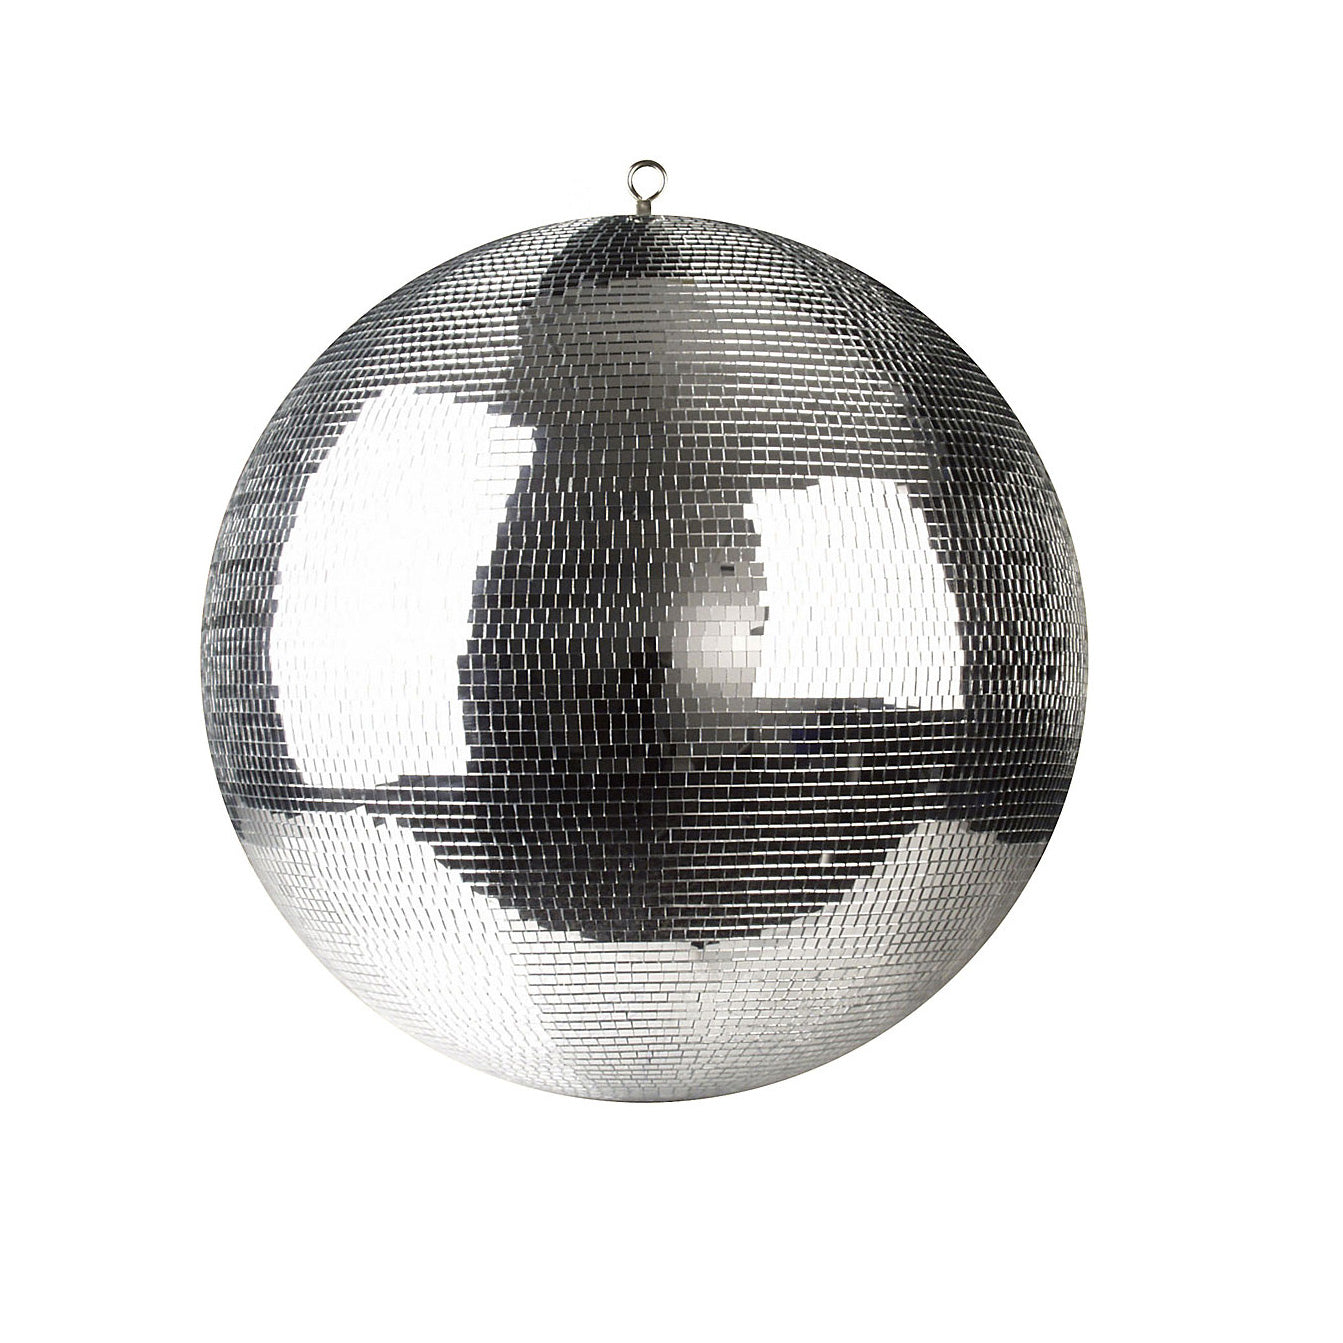 Pro X 40" inch Mirror Disco Ball Bright Silver Reflective Indoor DJ Sphere with Hanging Ring for Lighting MB-40